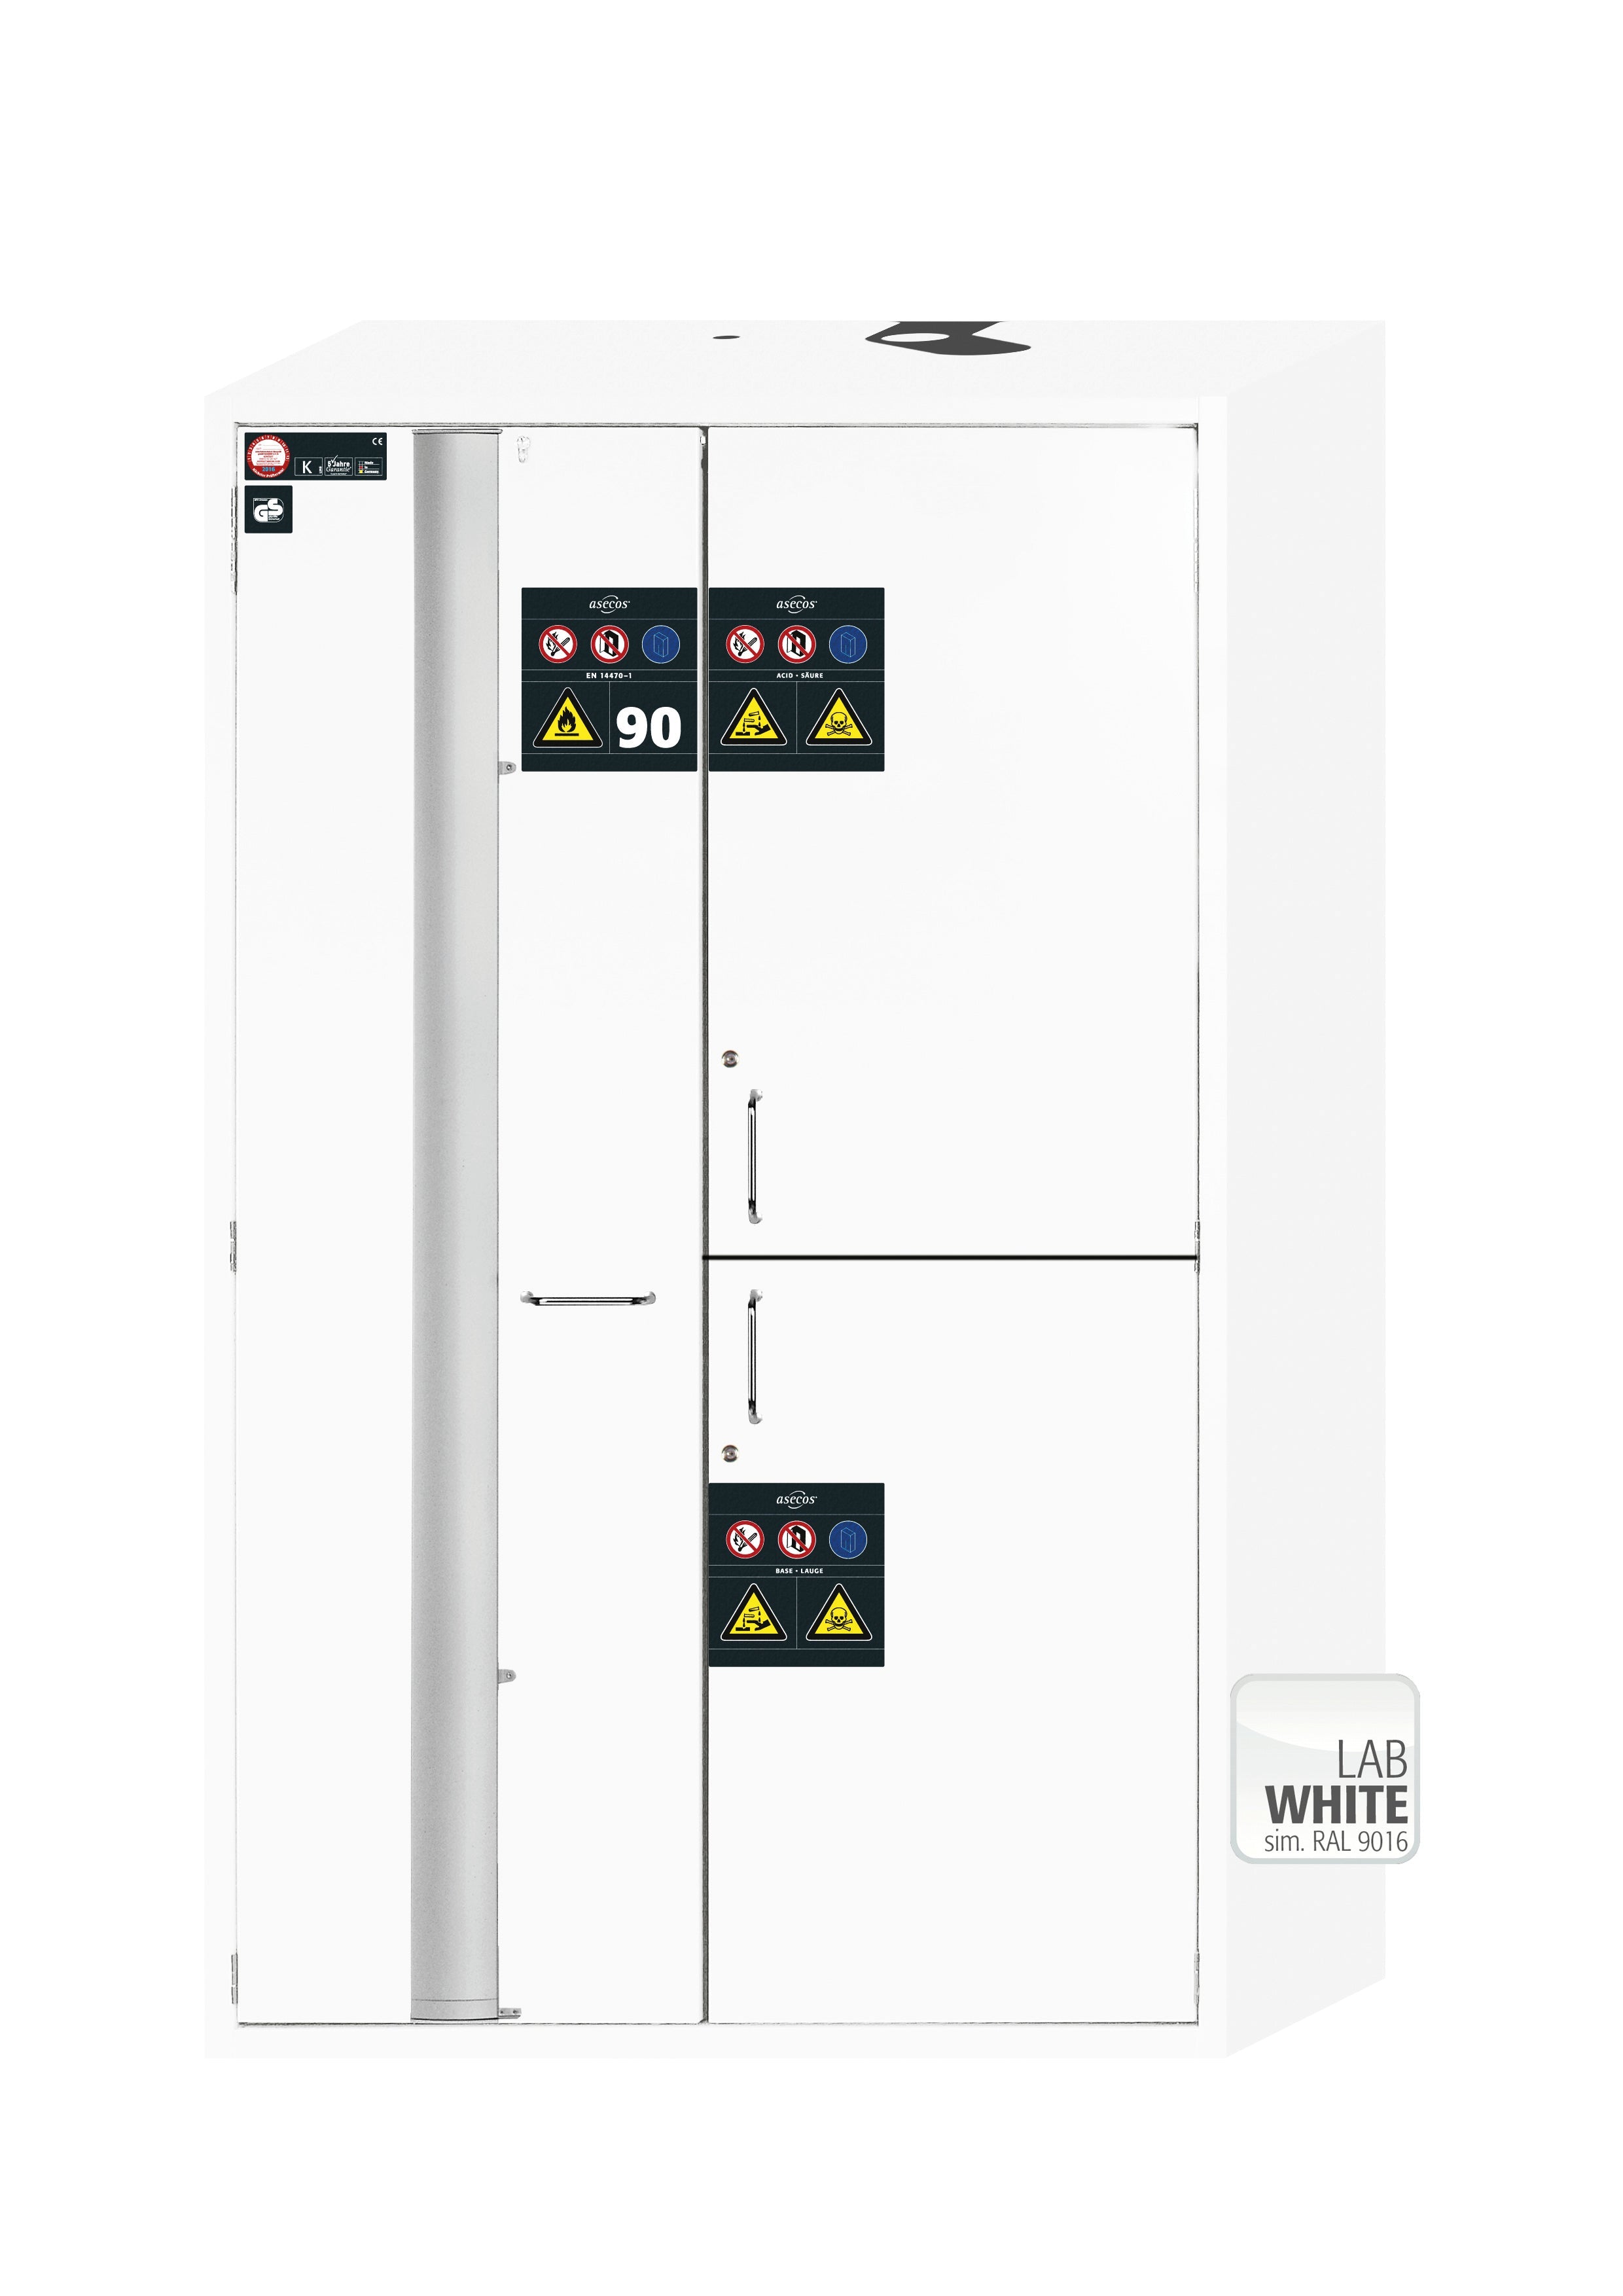 Type 90 combination safety cabinet K-PHOENIX Vol.2-90 model K90.196.120.MF.FWAC in laboratory white (similar to RAL 9016) with 6x standard pull-out tray (stainless steel 1.4301)